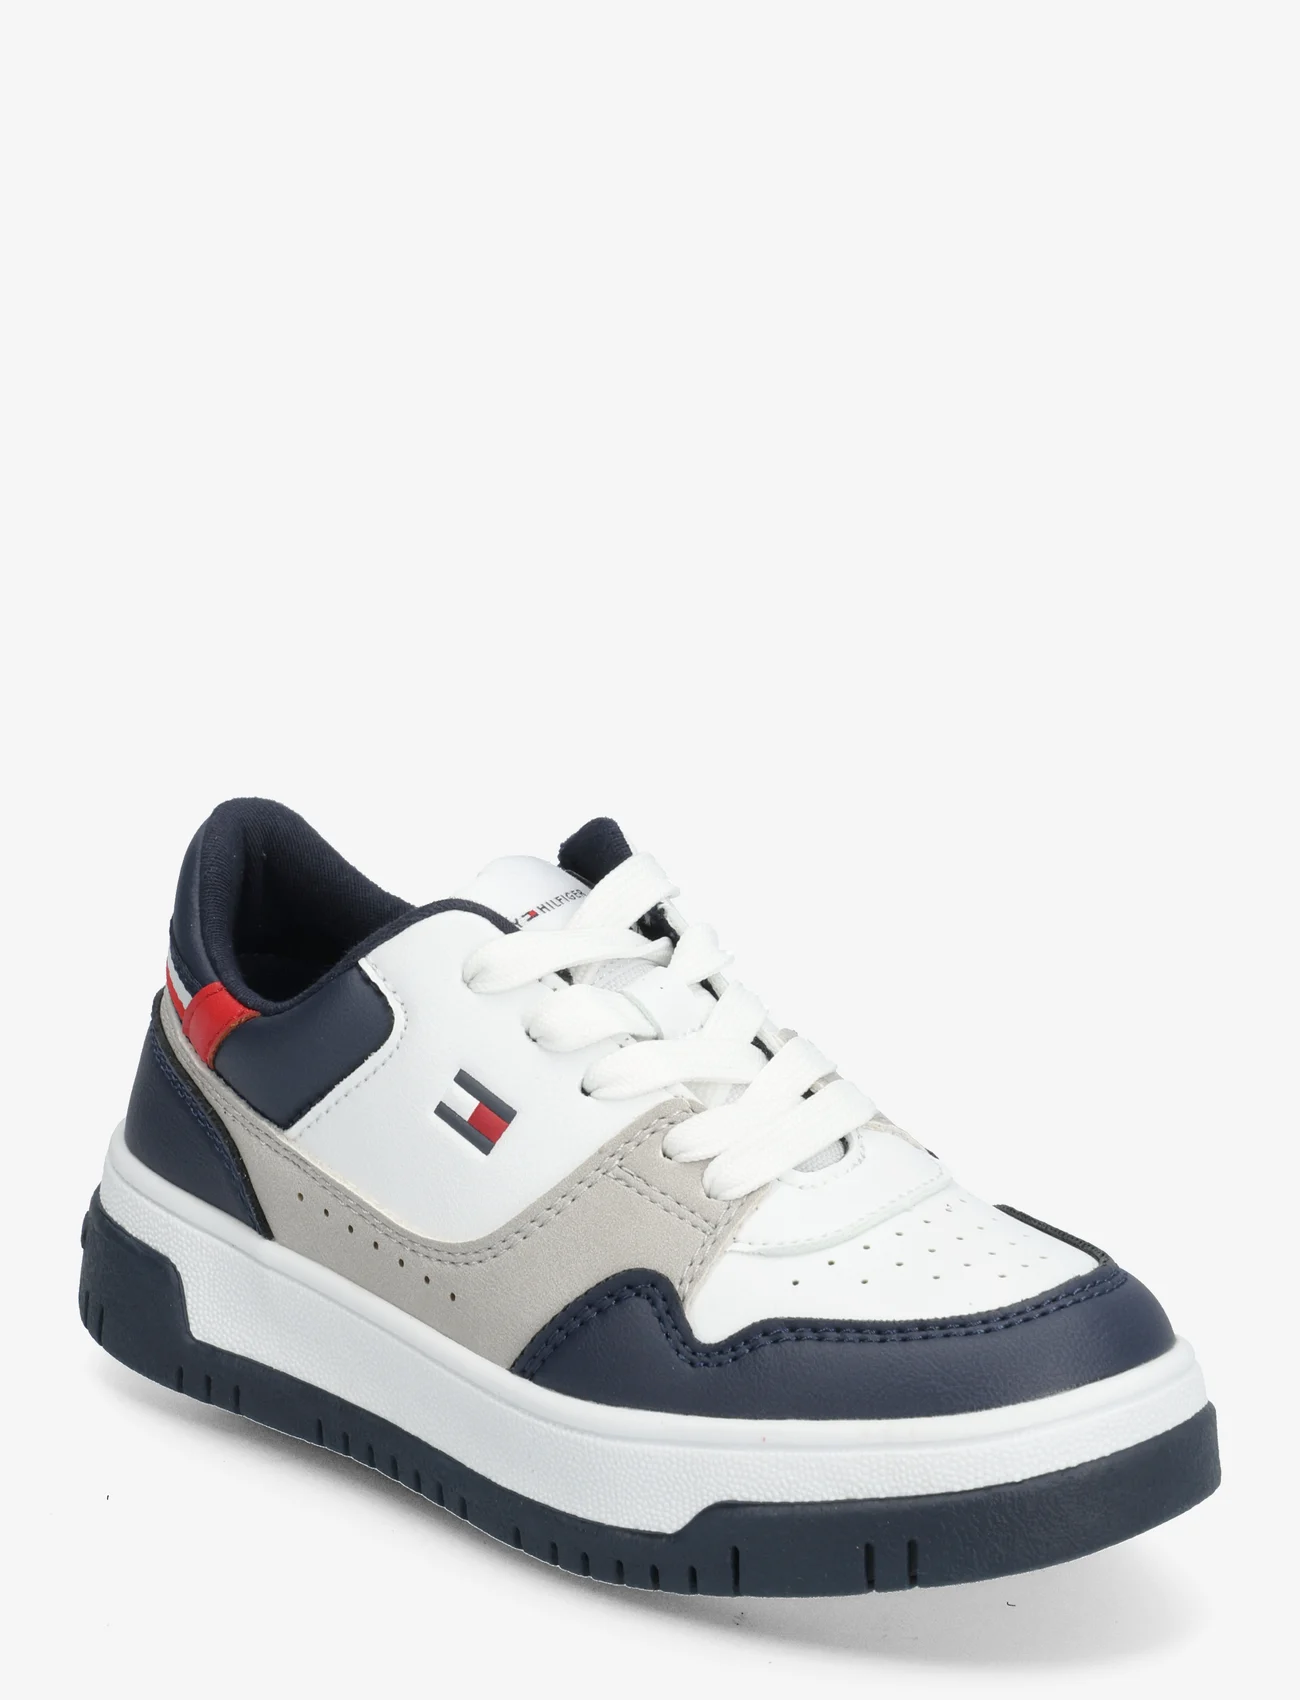 Tommy Hilfiger - LOW CUT LACE-UP SNEAKER - laag sneakers - white/blue/red - 0